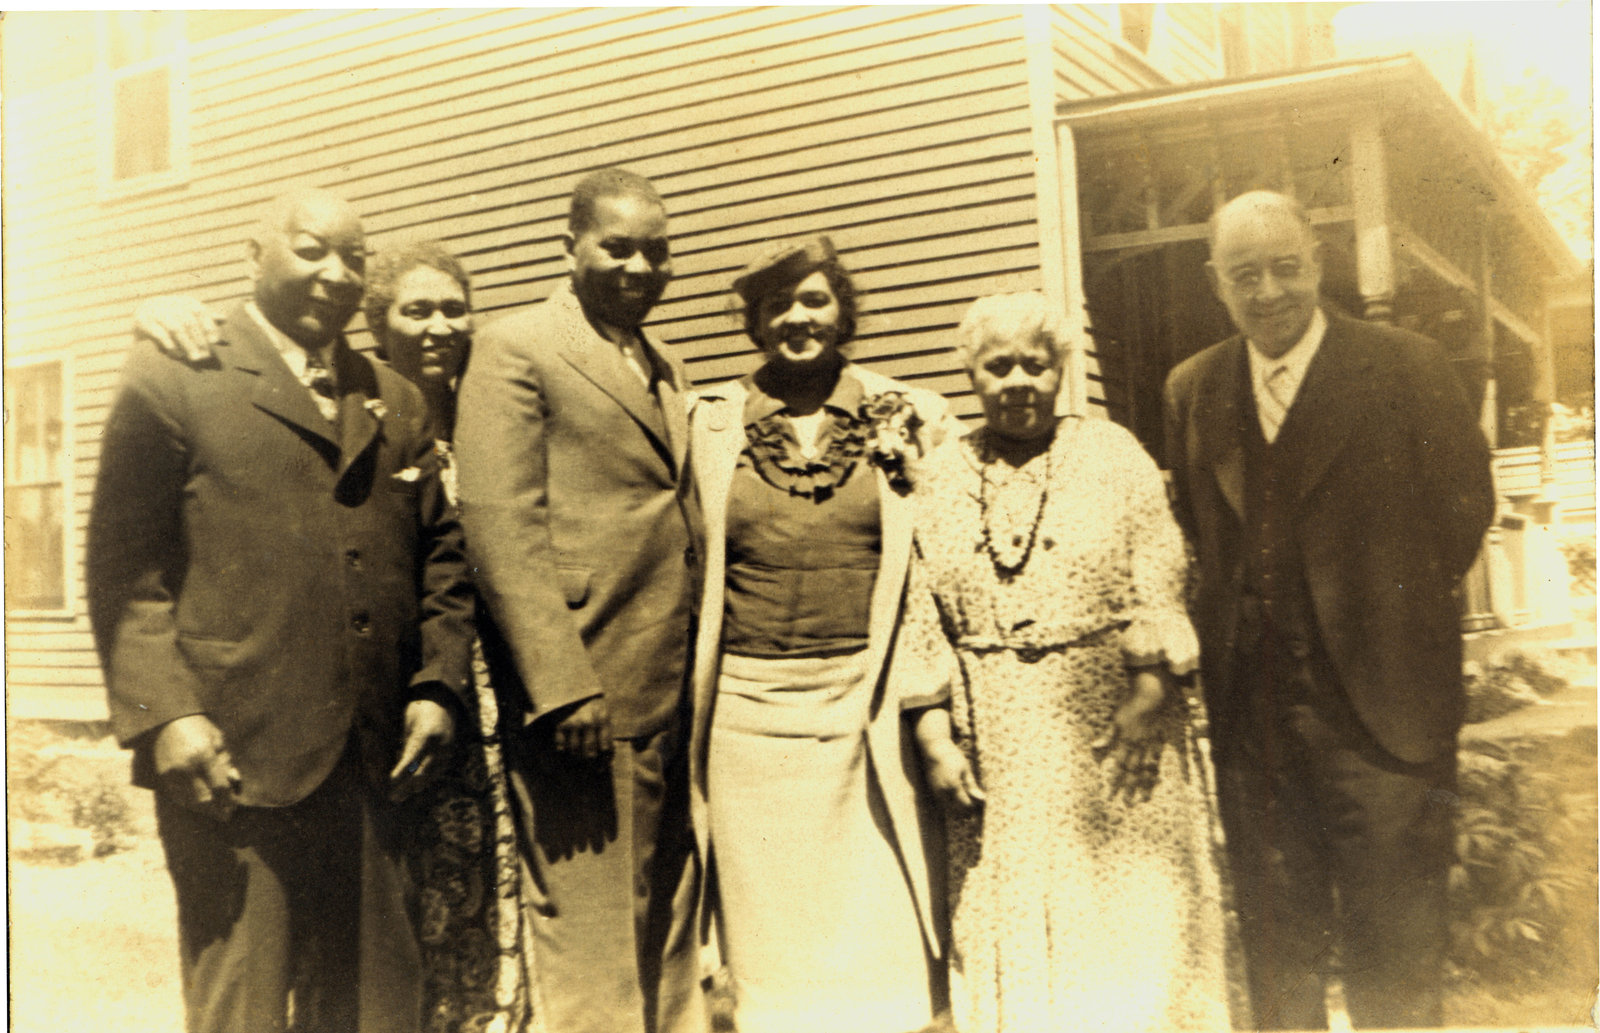 The wedding day of Richard Nelson Bell and Iris Sloman in 1939. <br>From left: Charles Bell; Josephine Sloman; Richard; Iris; Mary Bell; and Albert Sloman. <br>Courtesy the Brock University James A. Gibson Special Collections & Archives.